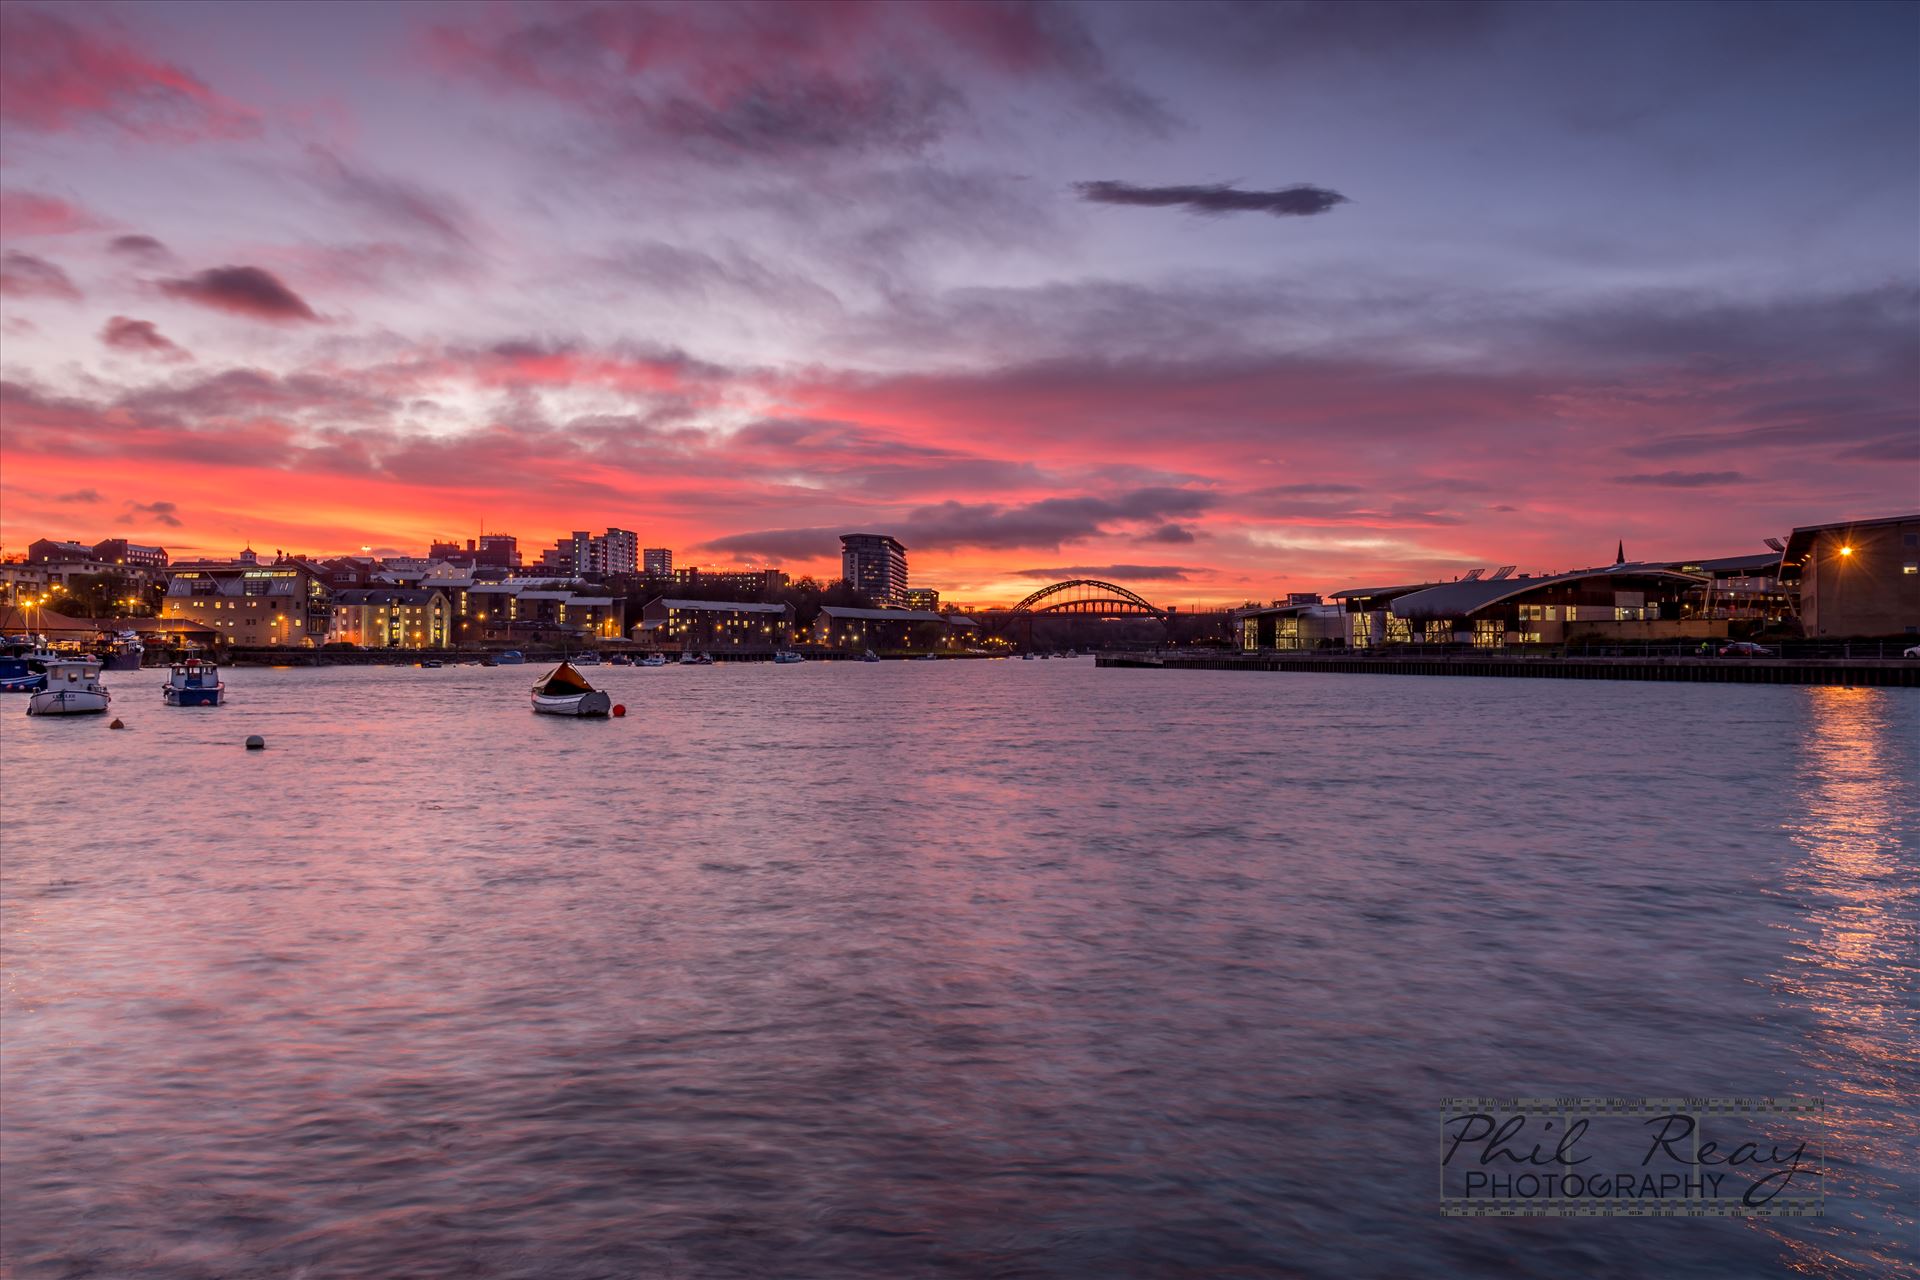 Sunset on the Wear - A fabulous sunset at Sunderland Fish Quay by philreay